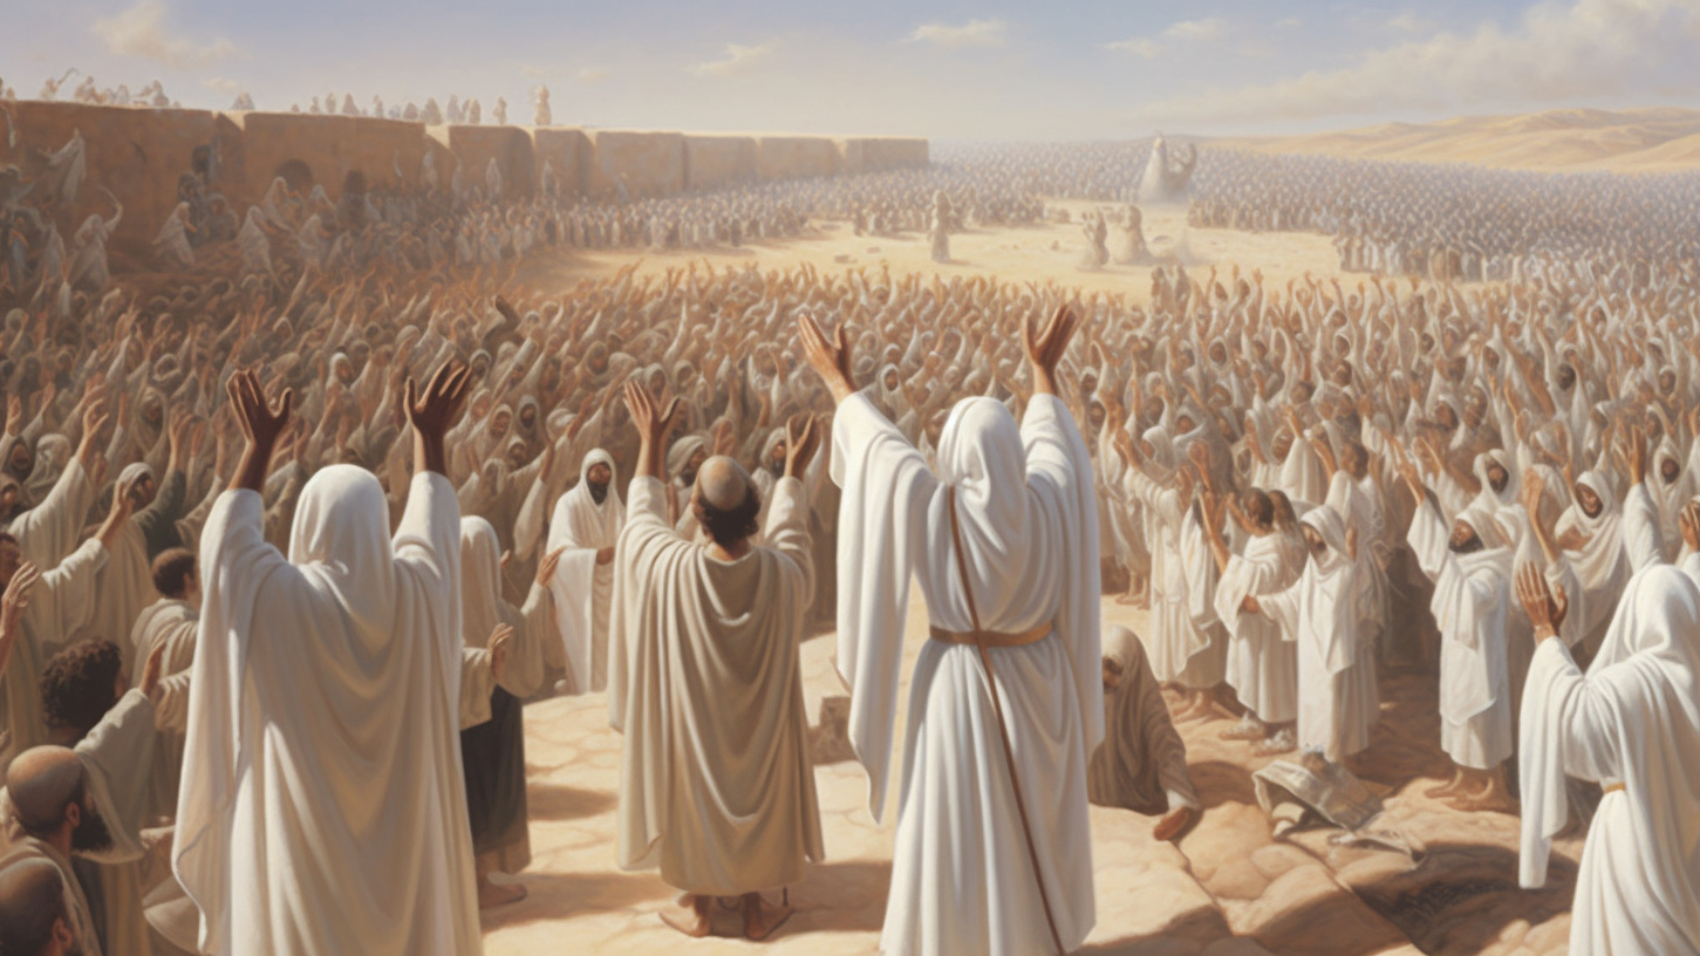 AlexF_ancient_Hebrew_middle_easter_looking_priests_wearing_whit_14f6458d-c380-49be-8d7d-14d5de4ae326